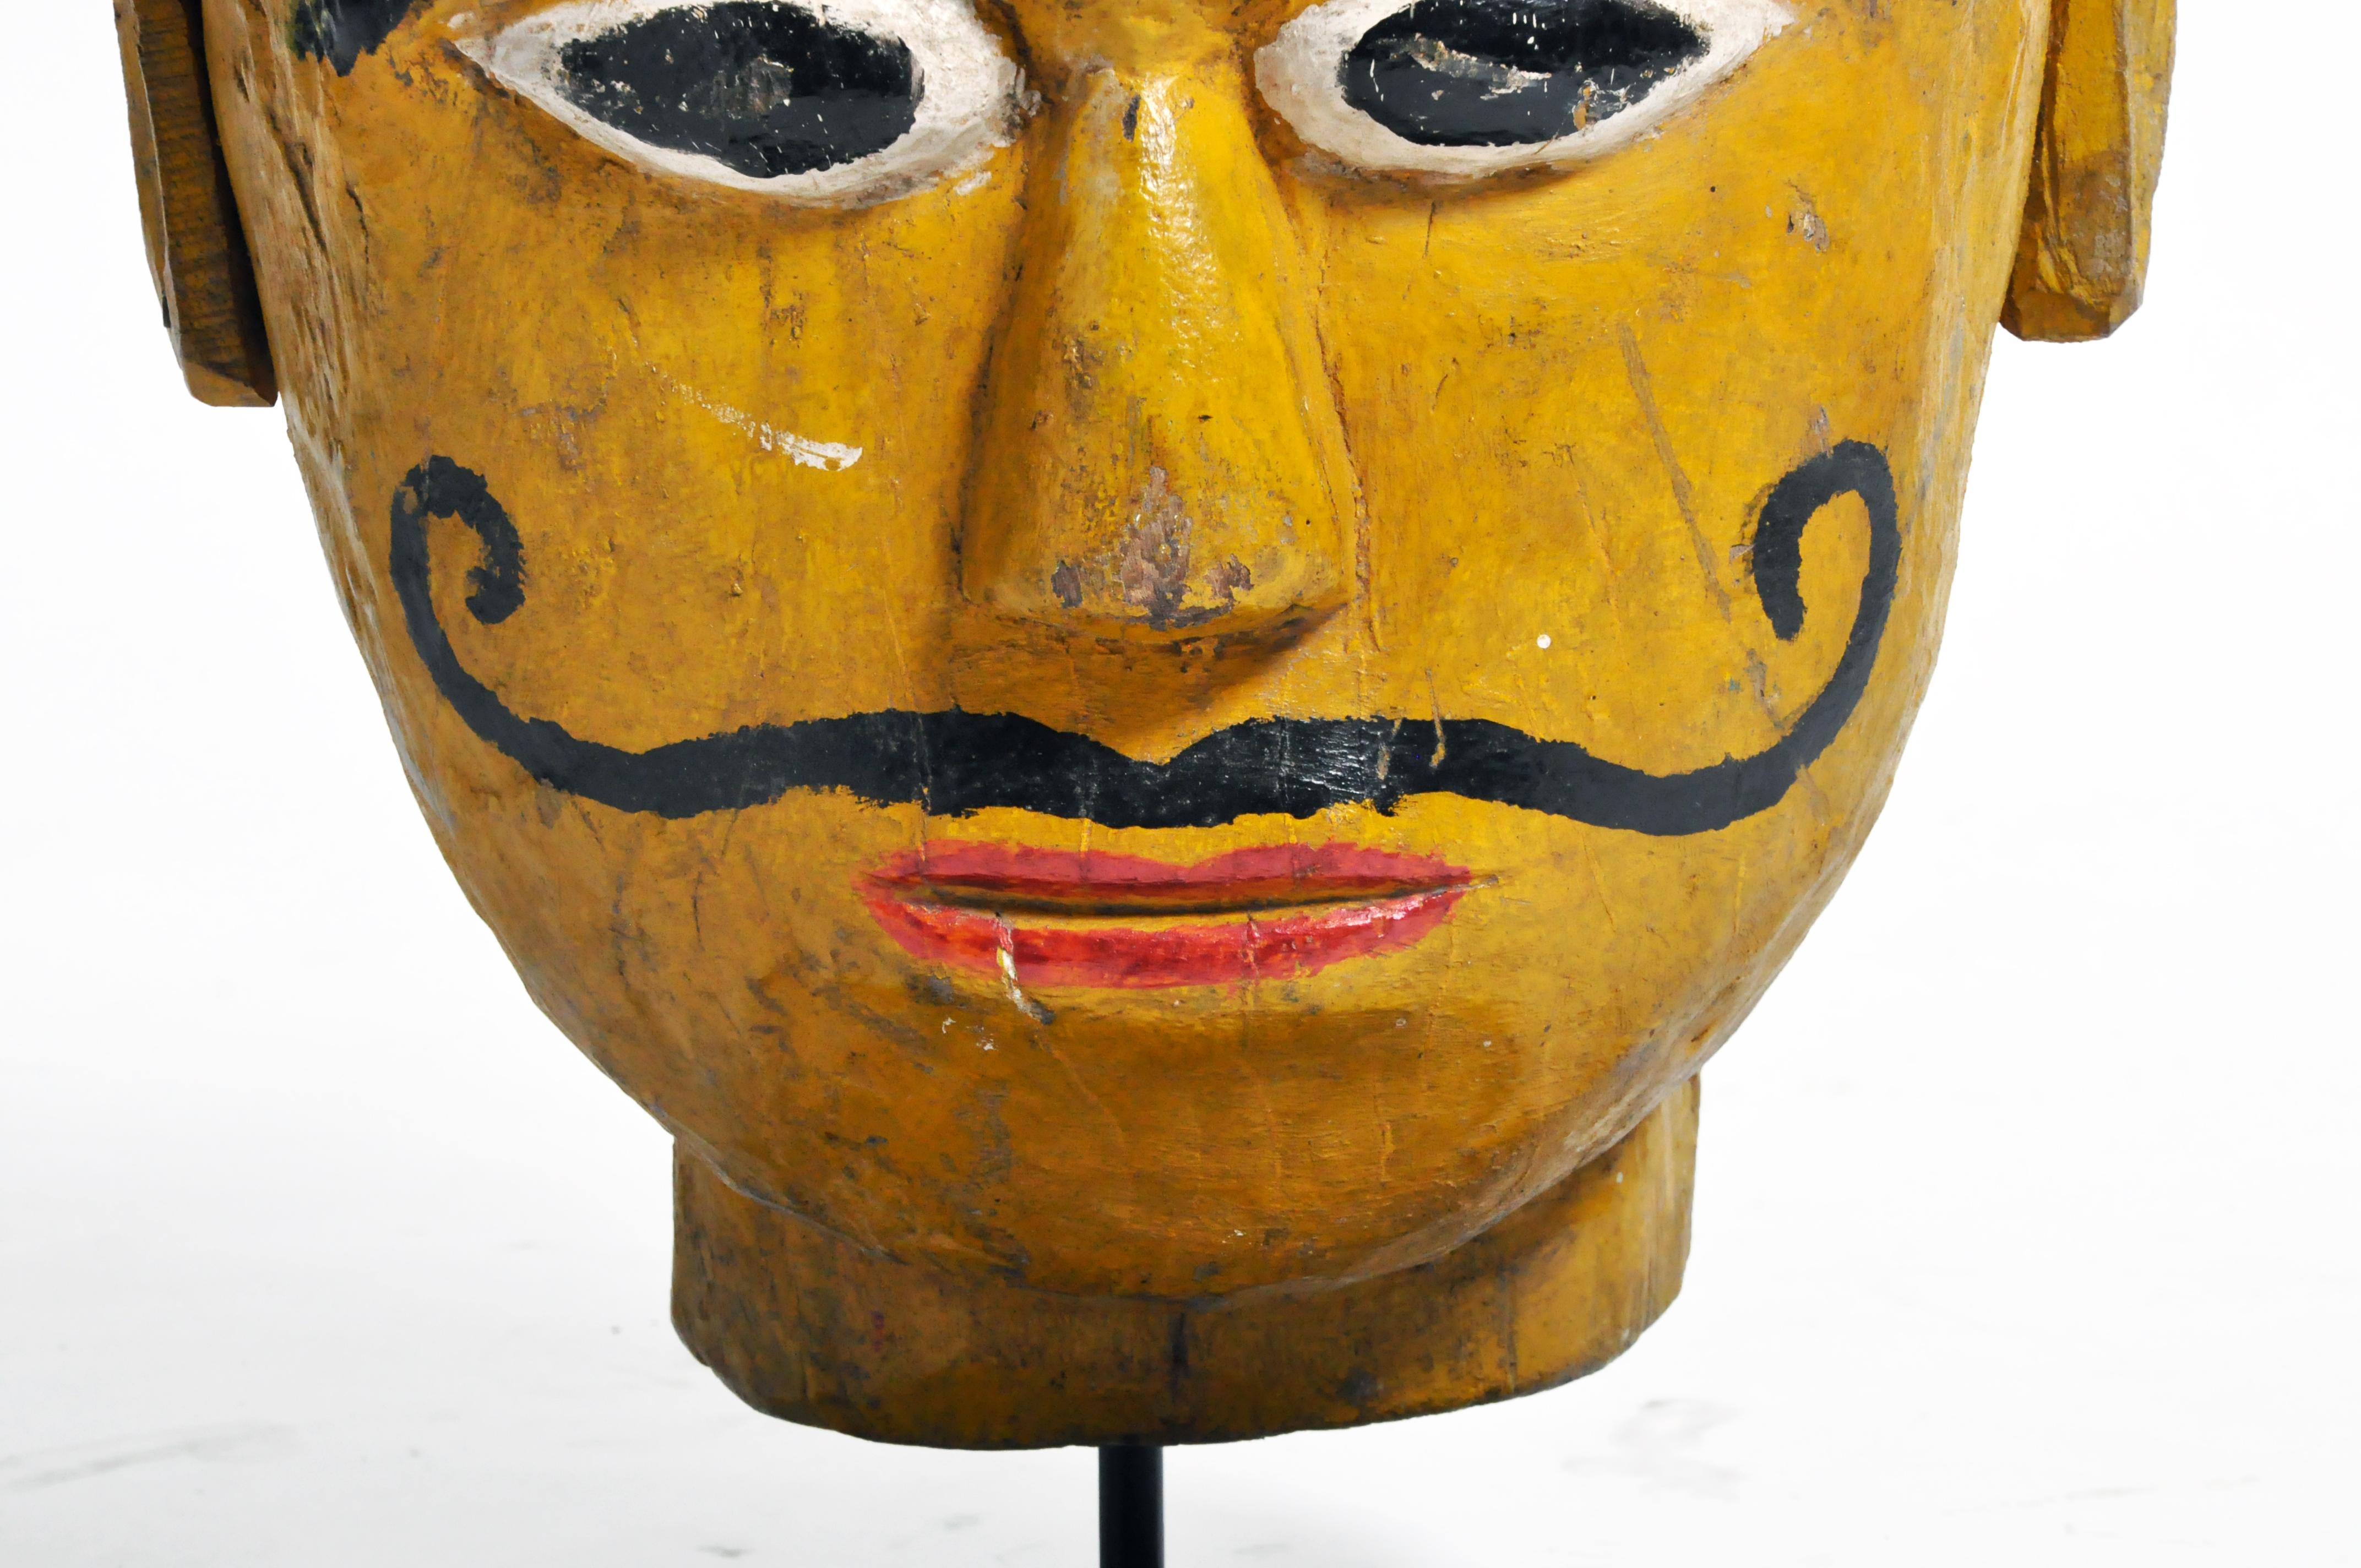 Indian Wooden Mask 2